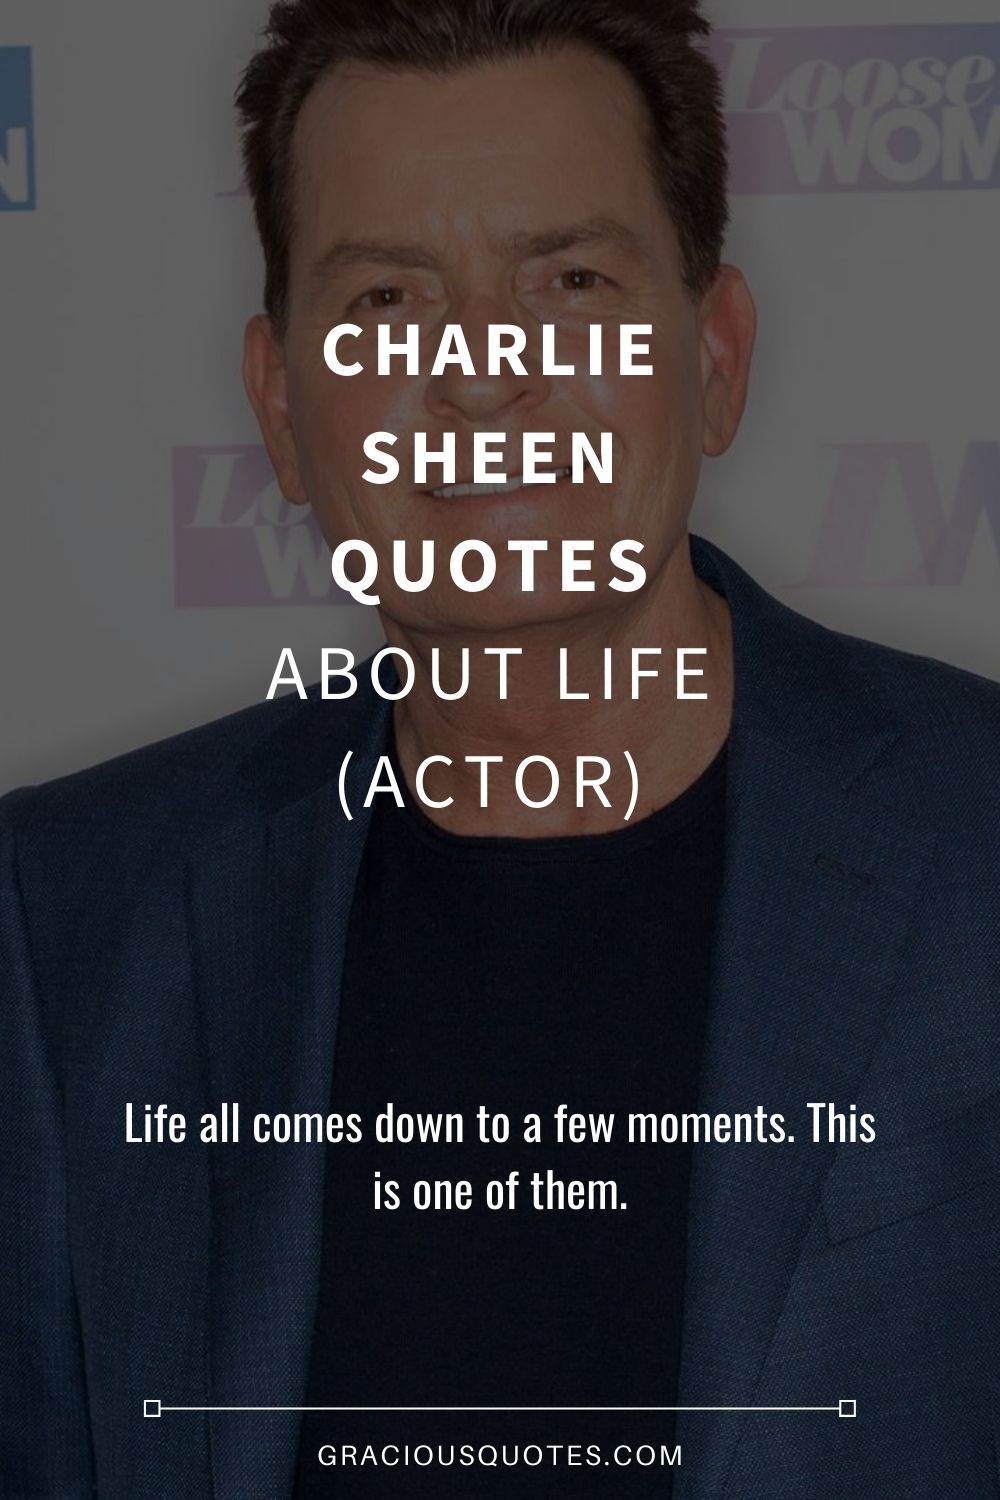 Charlie Sheen Quotes About Life (ACTOR) - Gracious Quotes